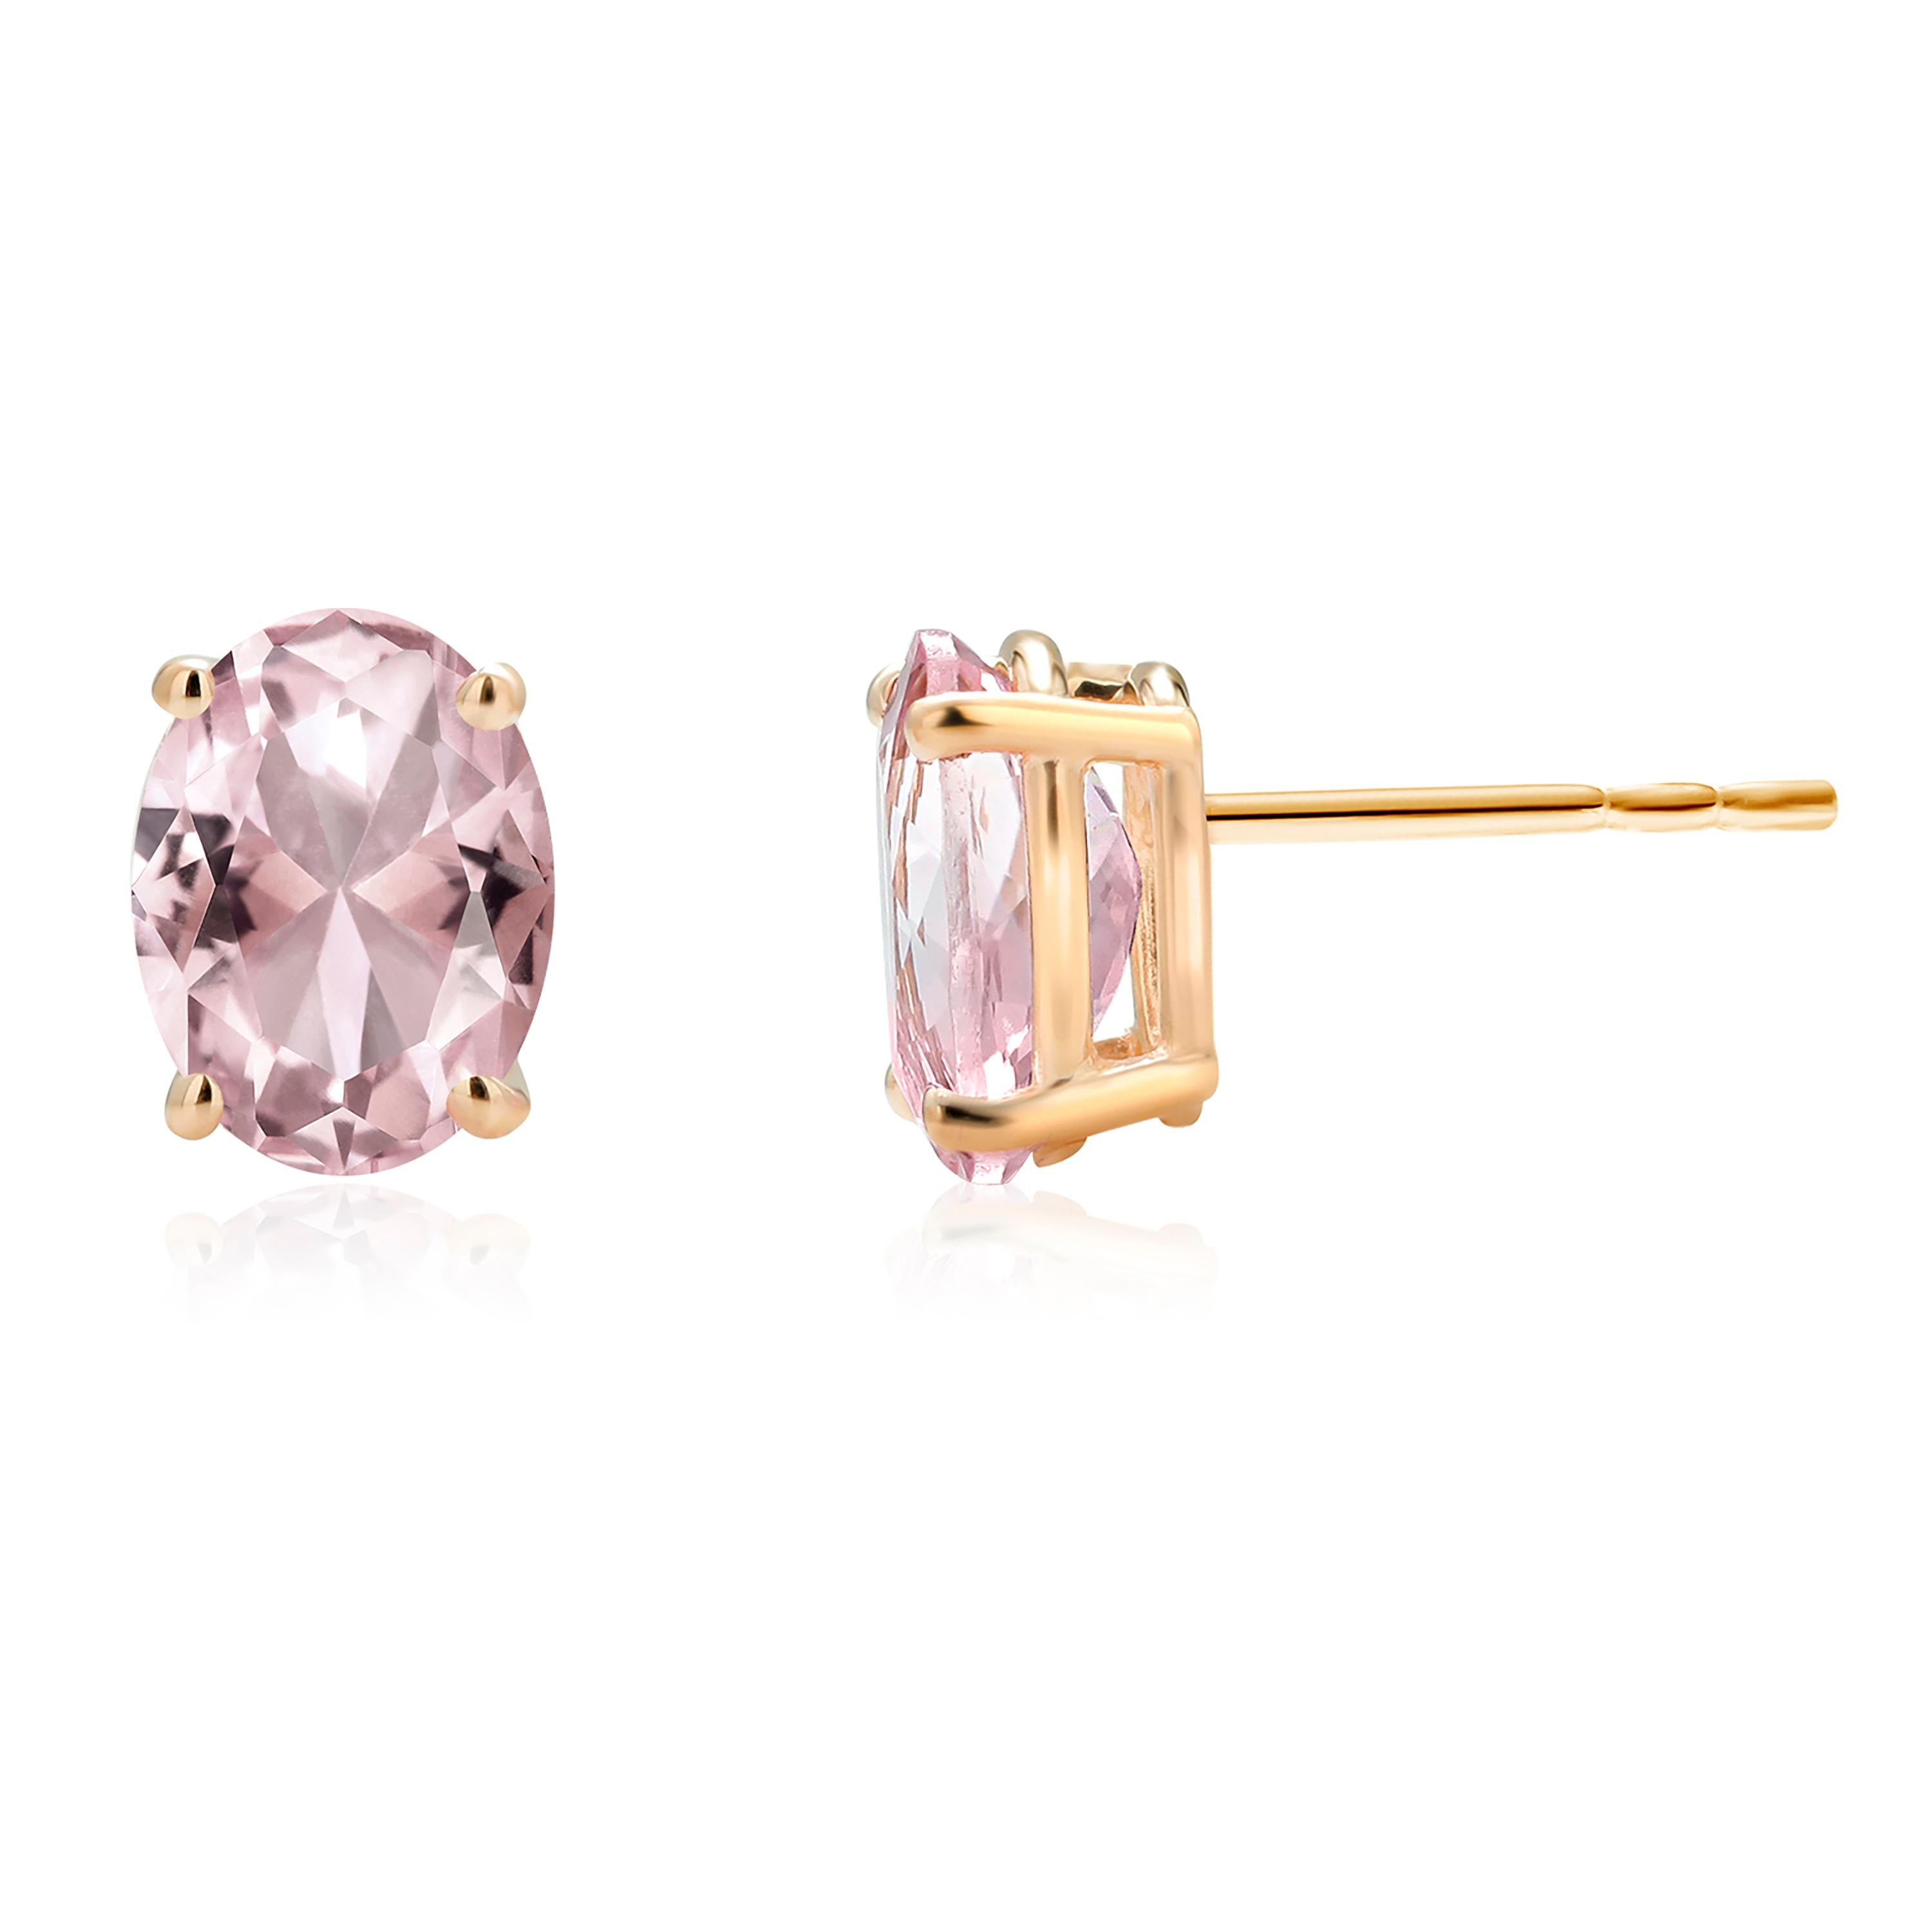 Oval Shaped Morganite Set in Yellow Gold Stud Earrings Weighing 5.95 Carats 3